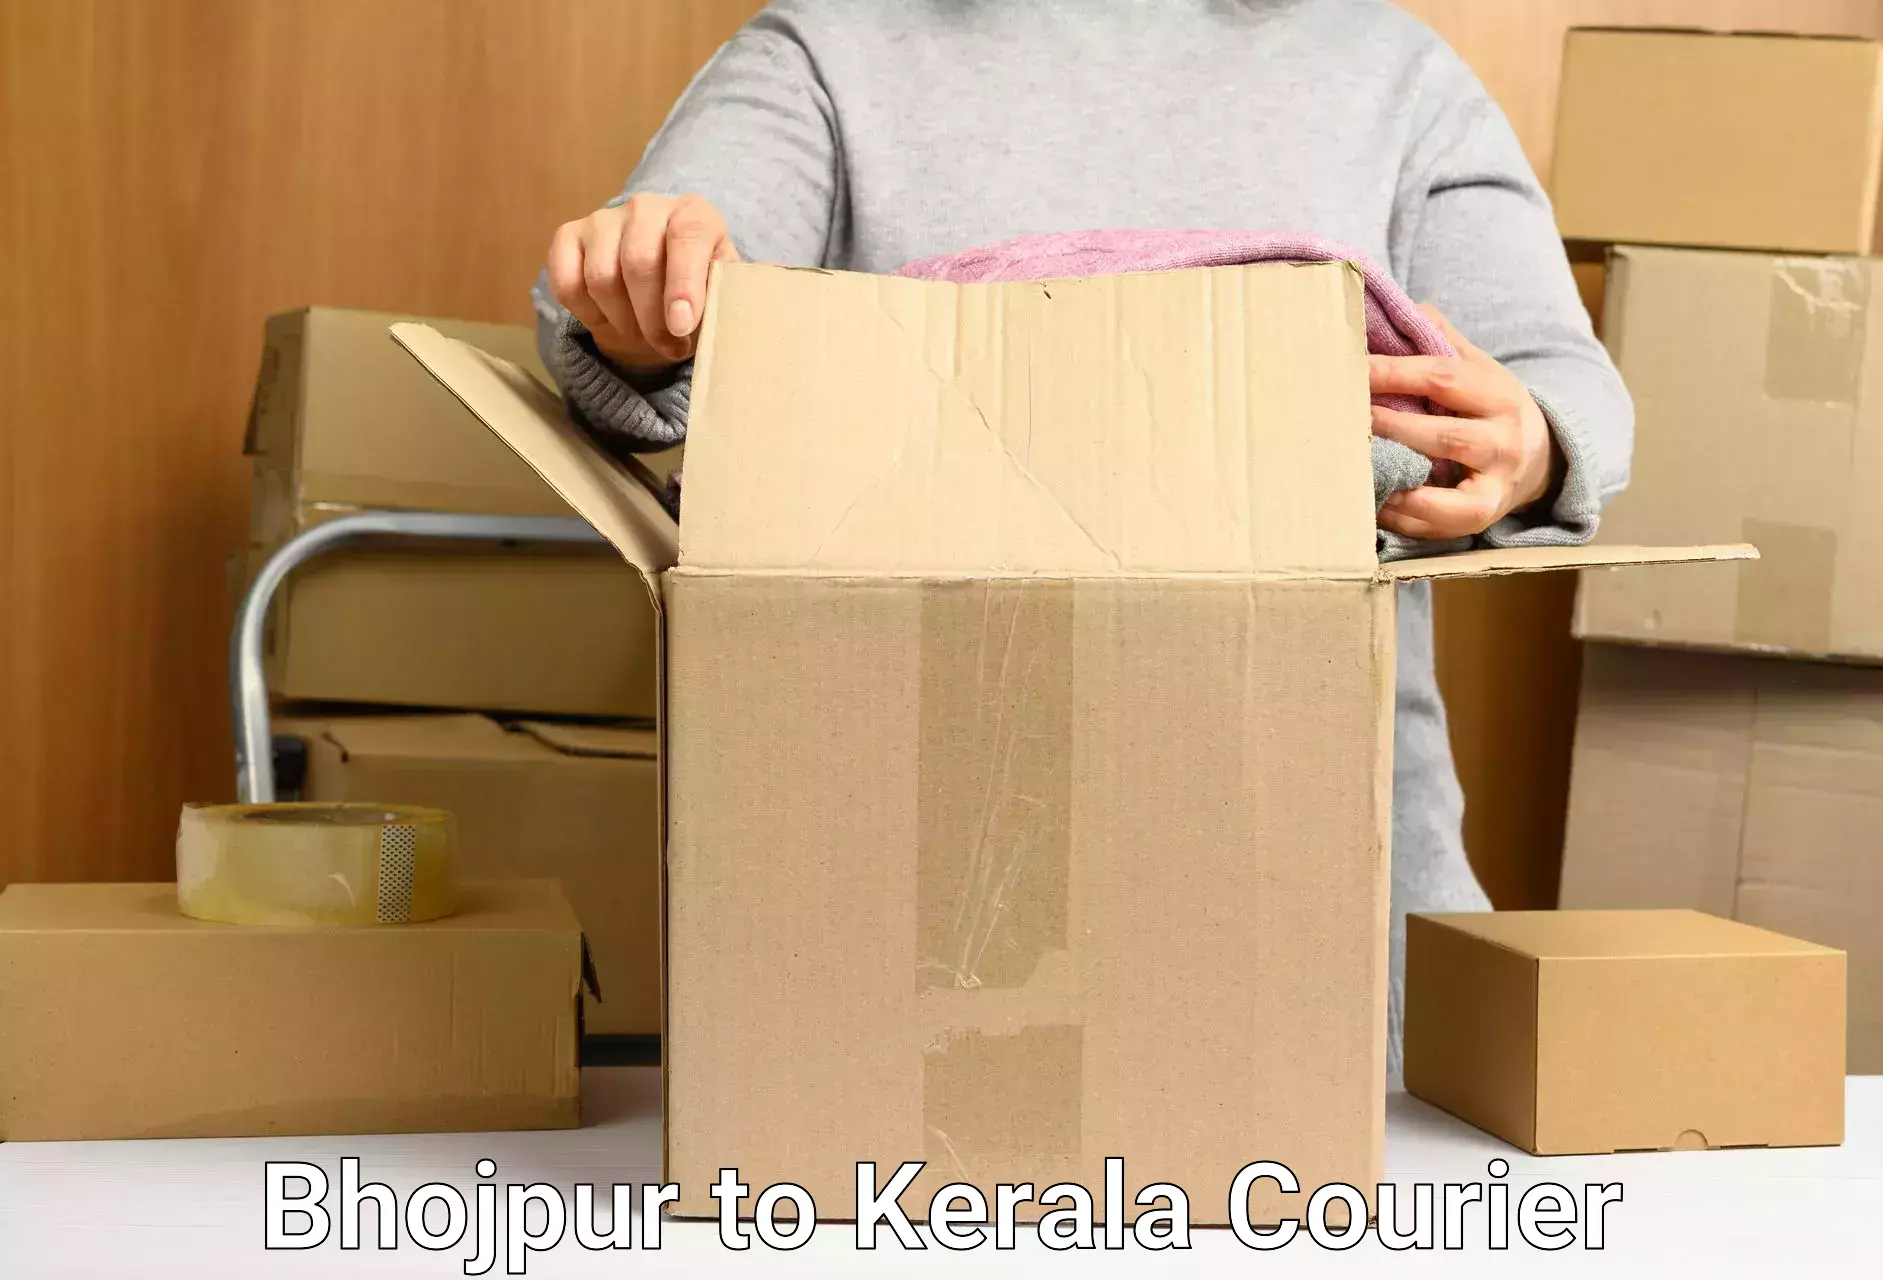 24/7 courier service Bhojpur to Kottayam